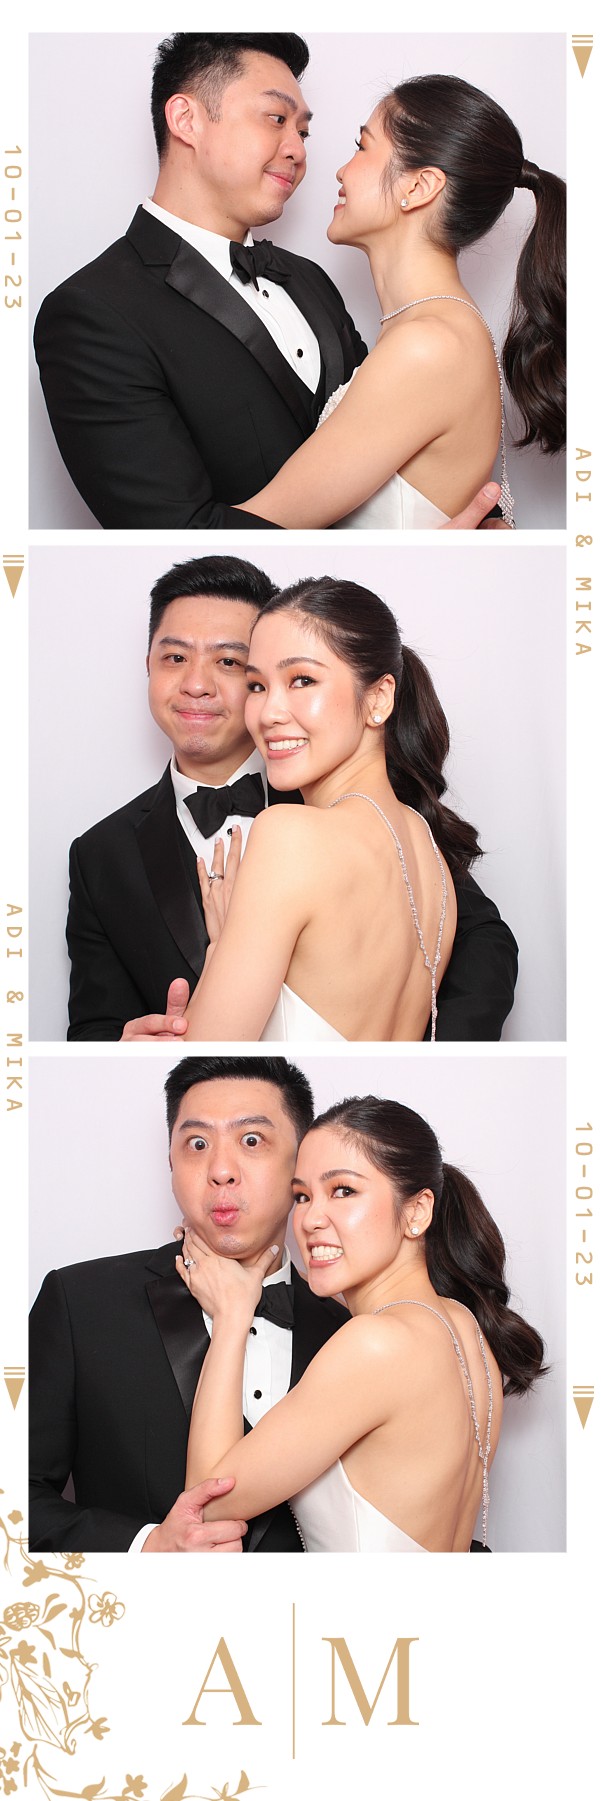 Adrian and Mika’s Wedding – Vintage Booth